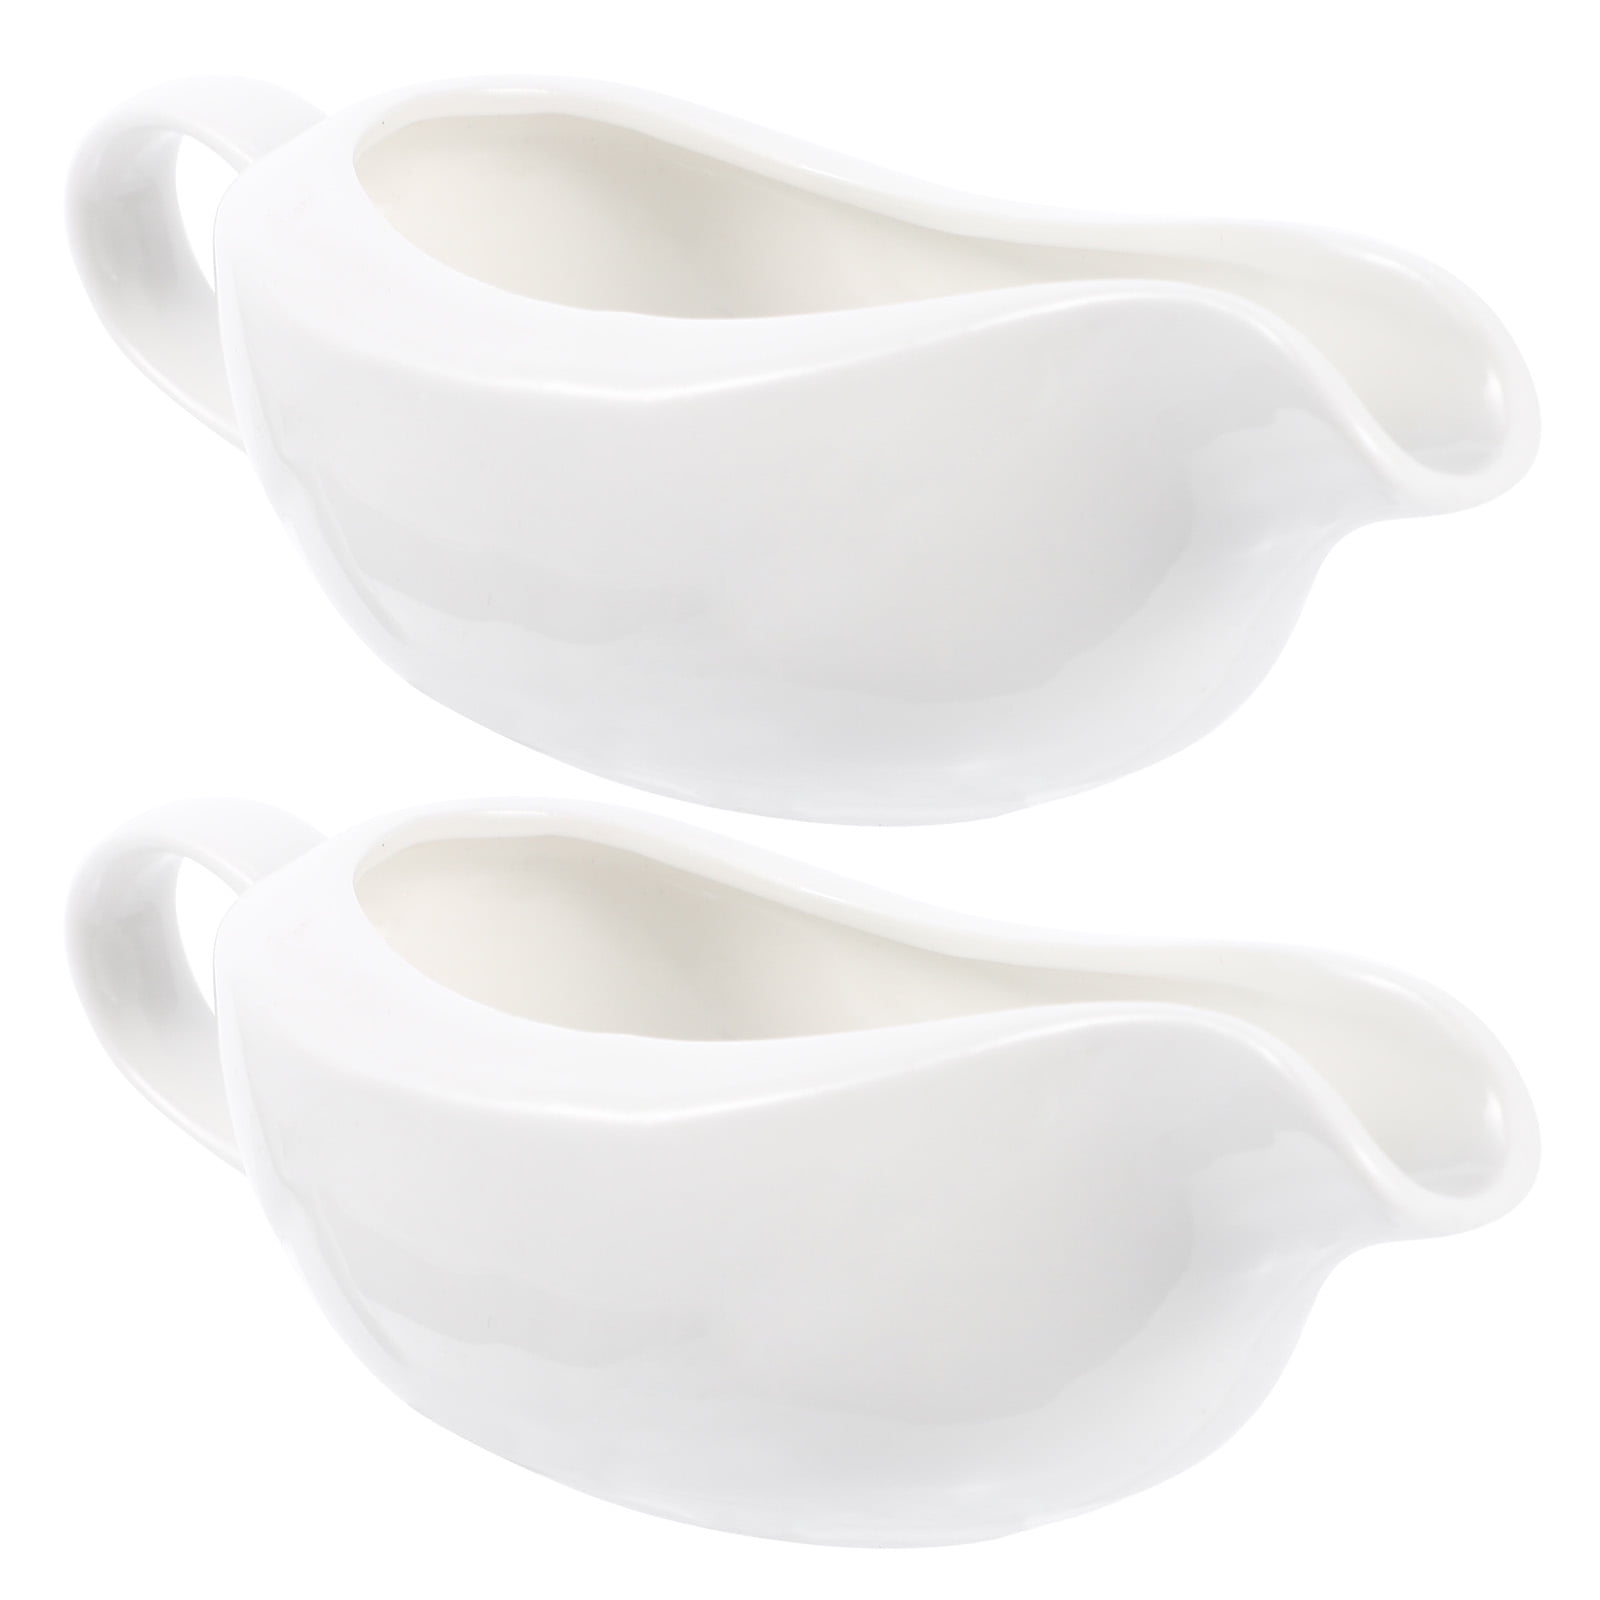 Creamer Microwave & Dishwasher Safe Porcelain Gravy Boat 14 oz Easy Pour White Gravy Boat with Saucer Stand for Salad Dressings 1PC 400ML Milk,Broth 